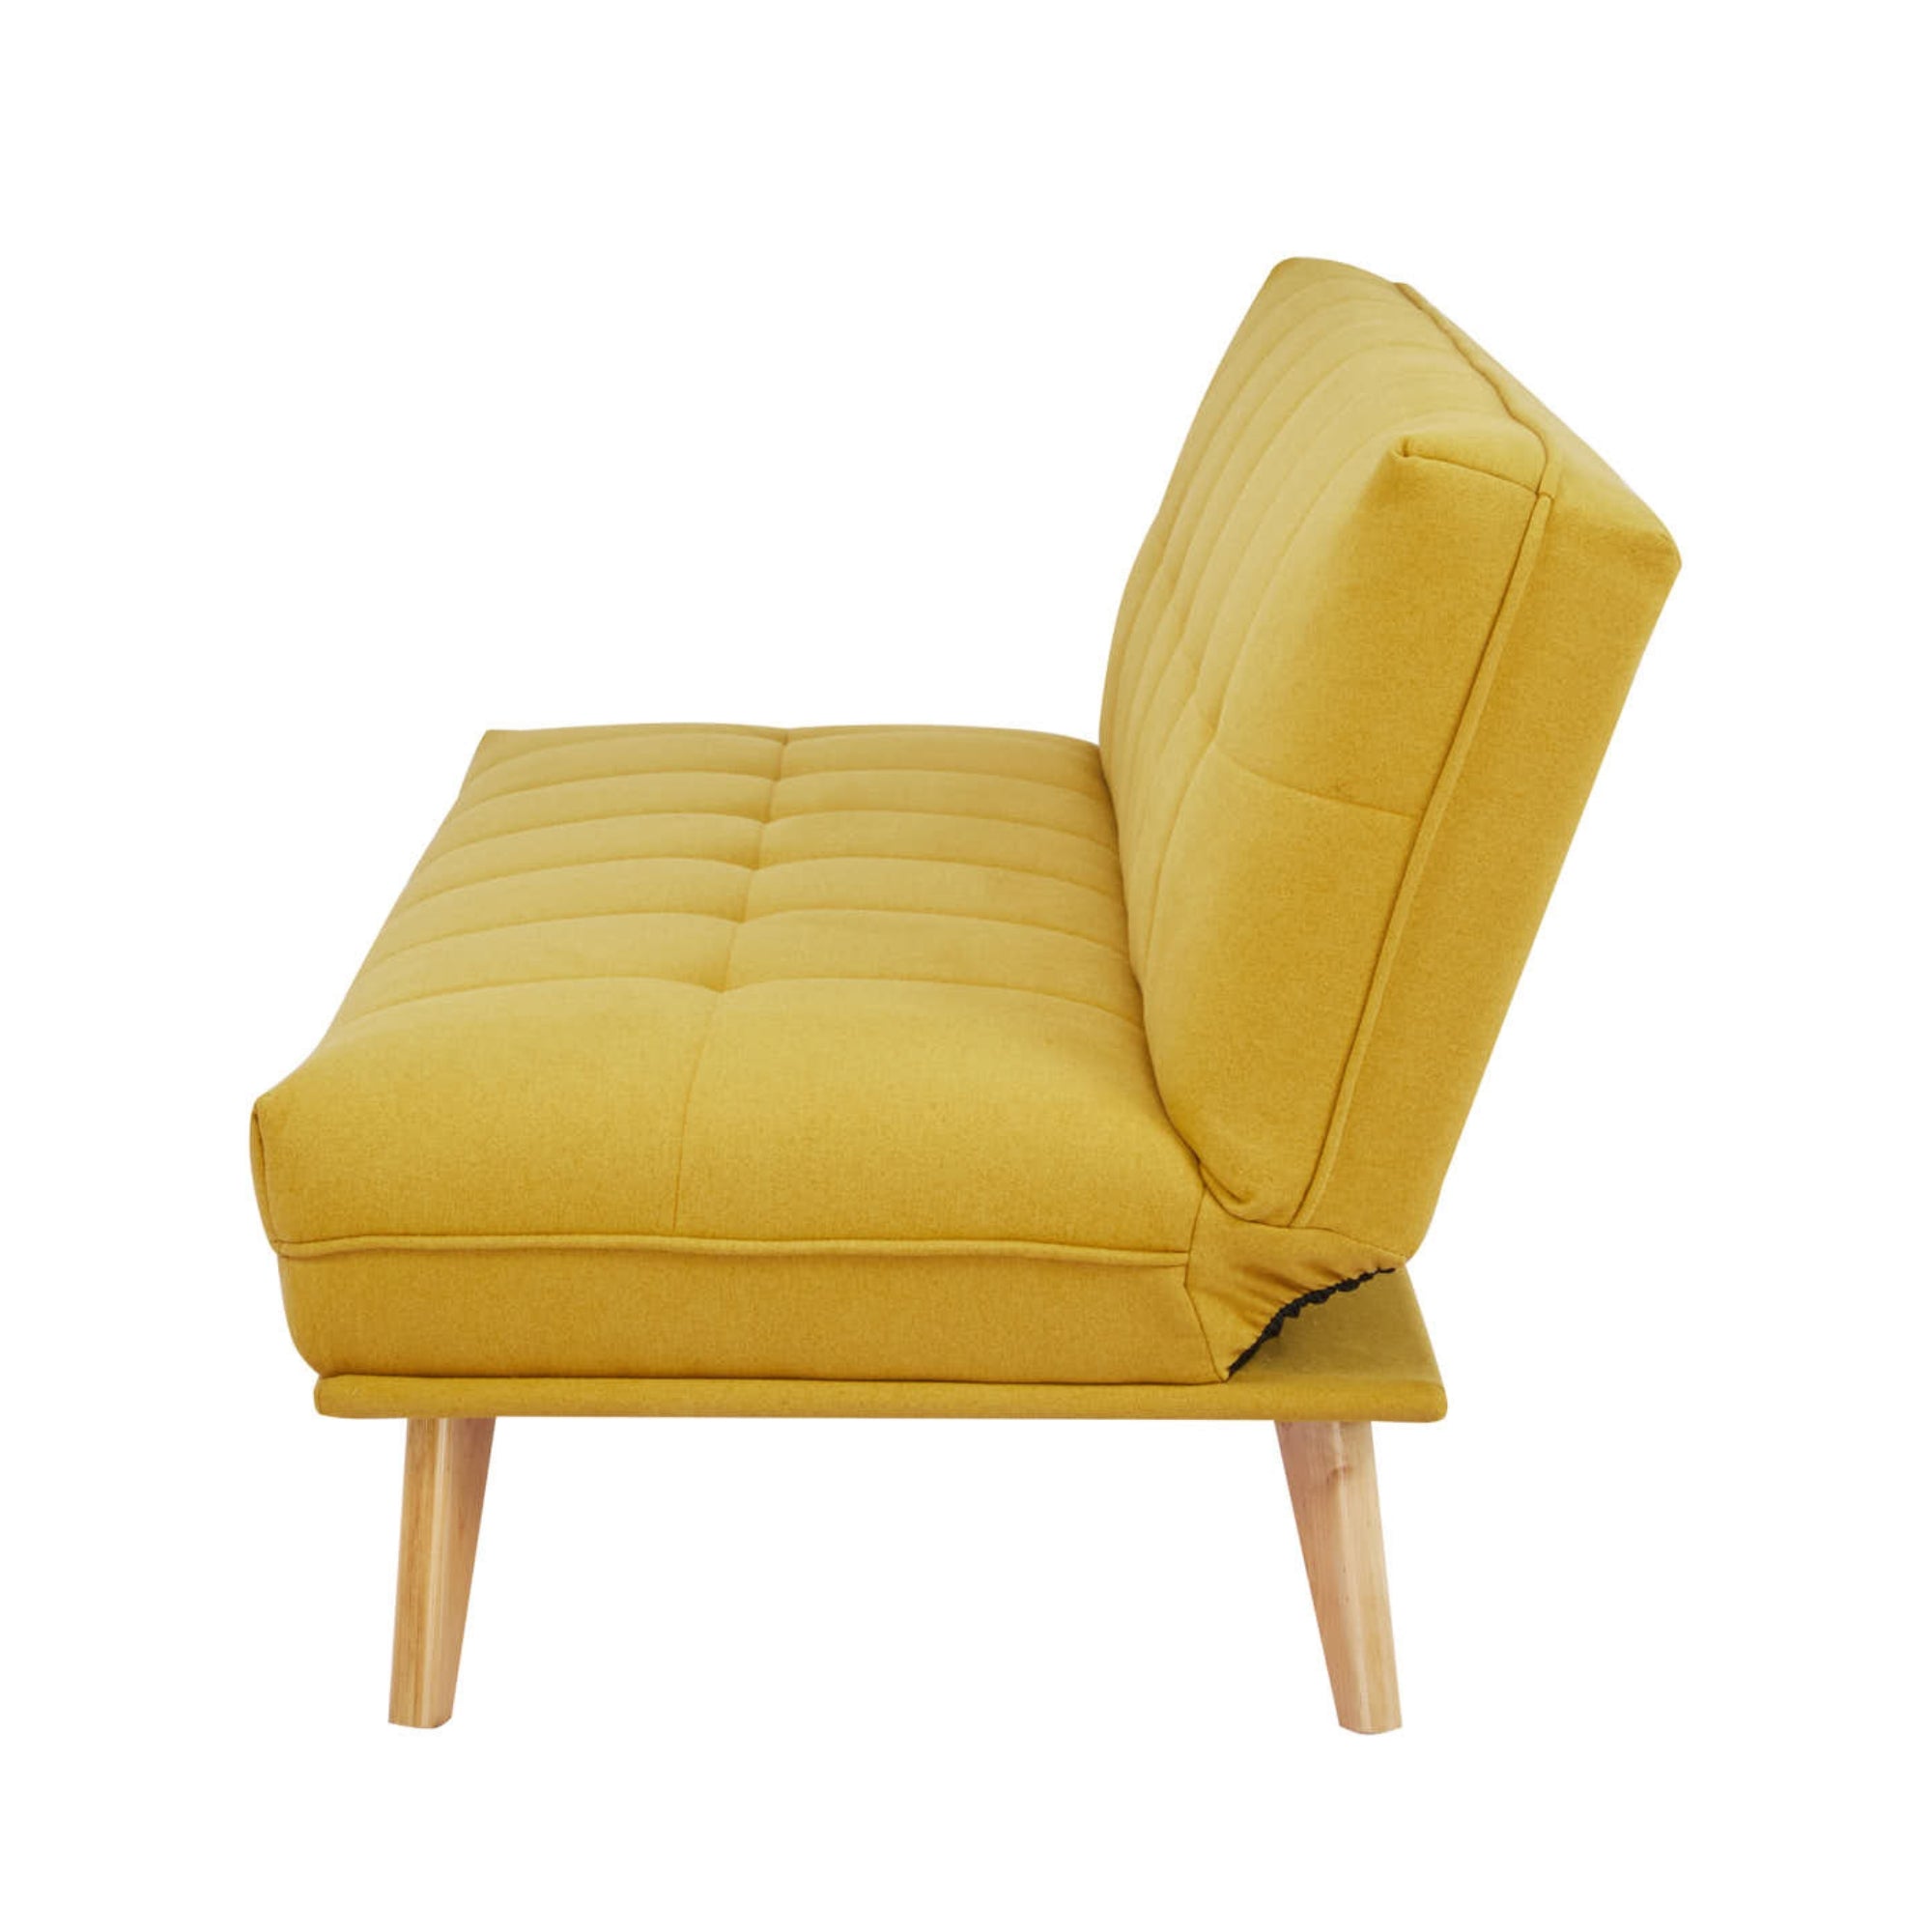 Yellow 3-Seater Sofa Bed, Upholstered, Wooden Legs | Jovie